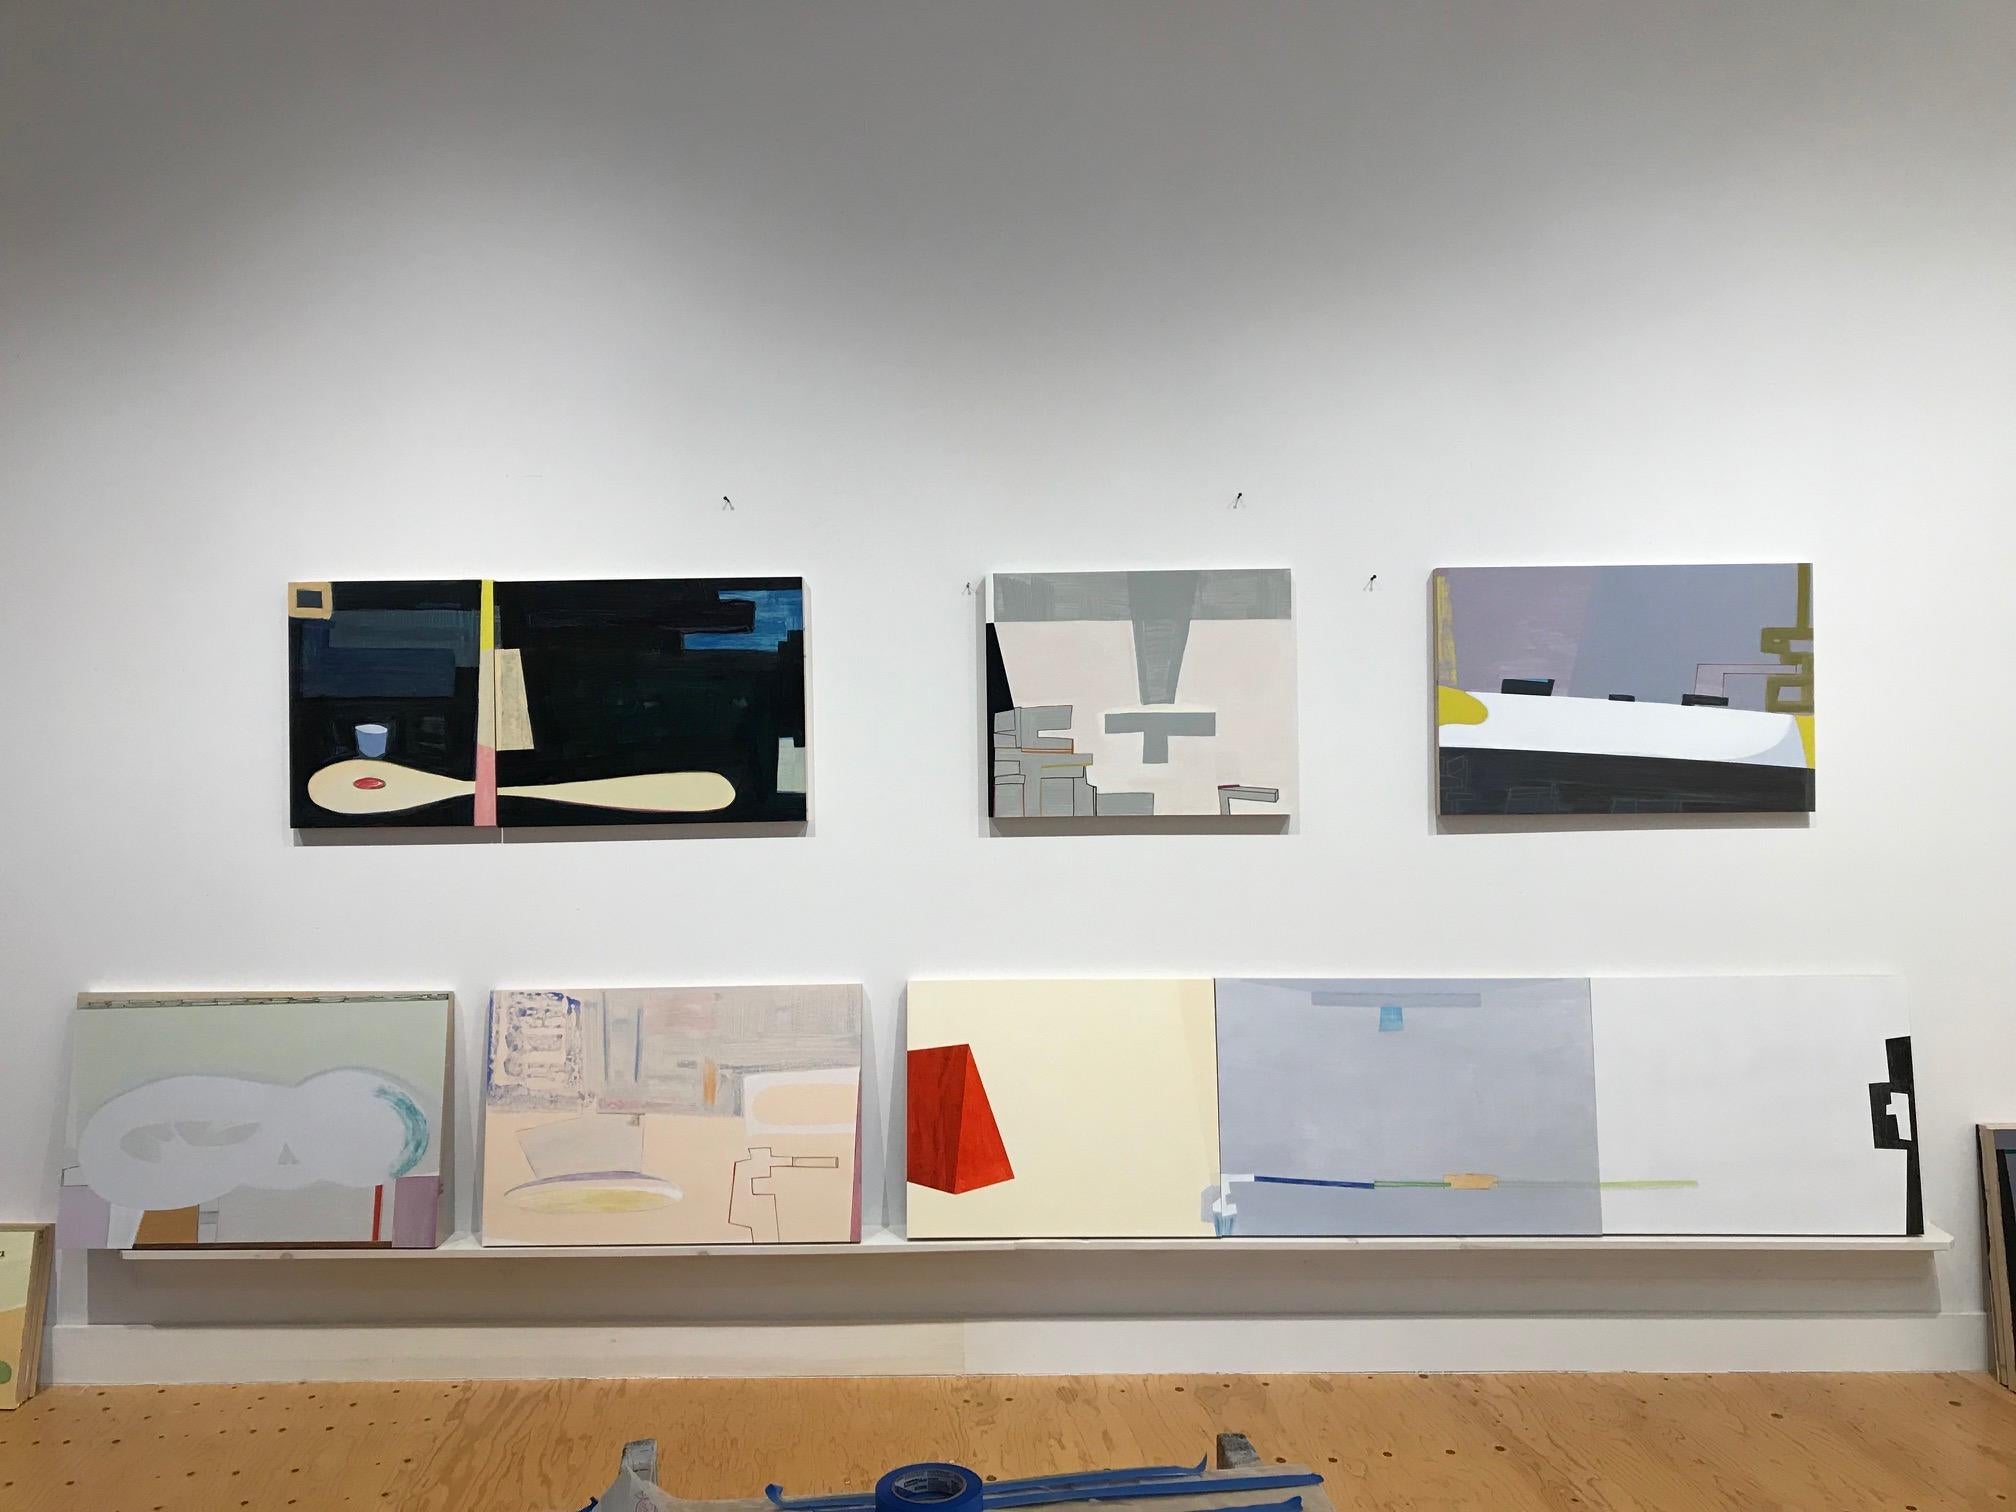 The COM painting are a series of five paintings on panels created in 2011-12. Those panels are meant to be read in a cinematic way from left to right as the light changes in each work, indicating a progression of time from early morning to late in